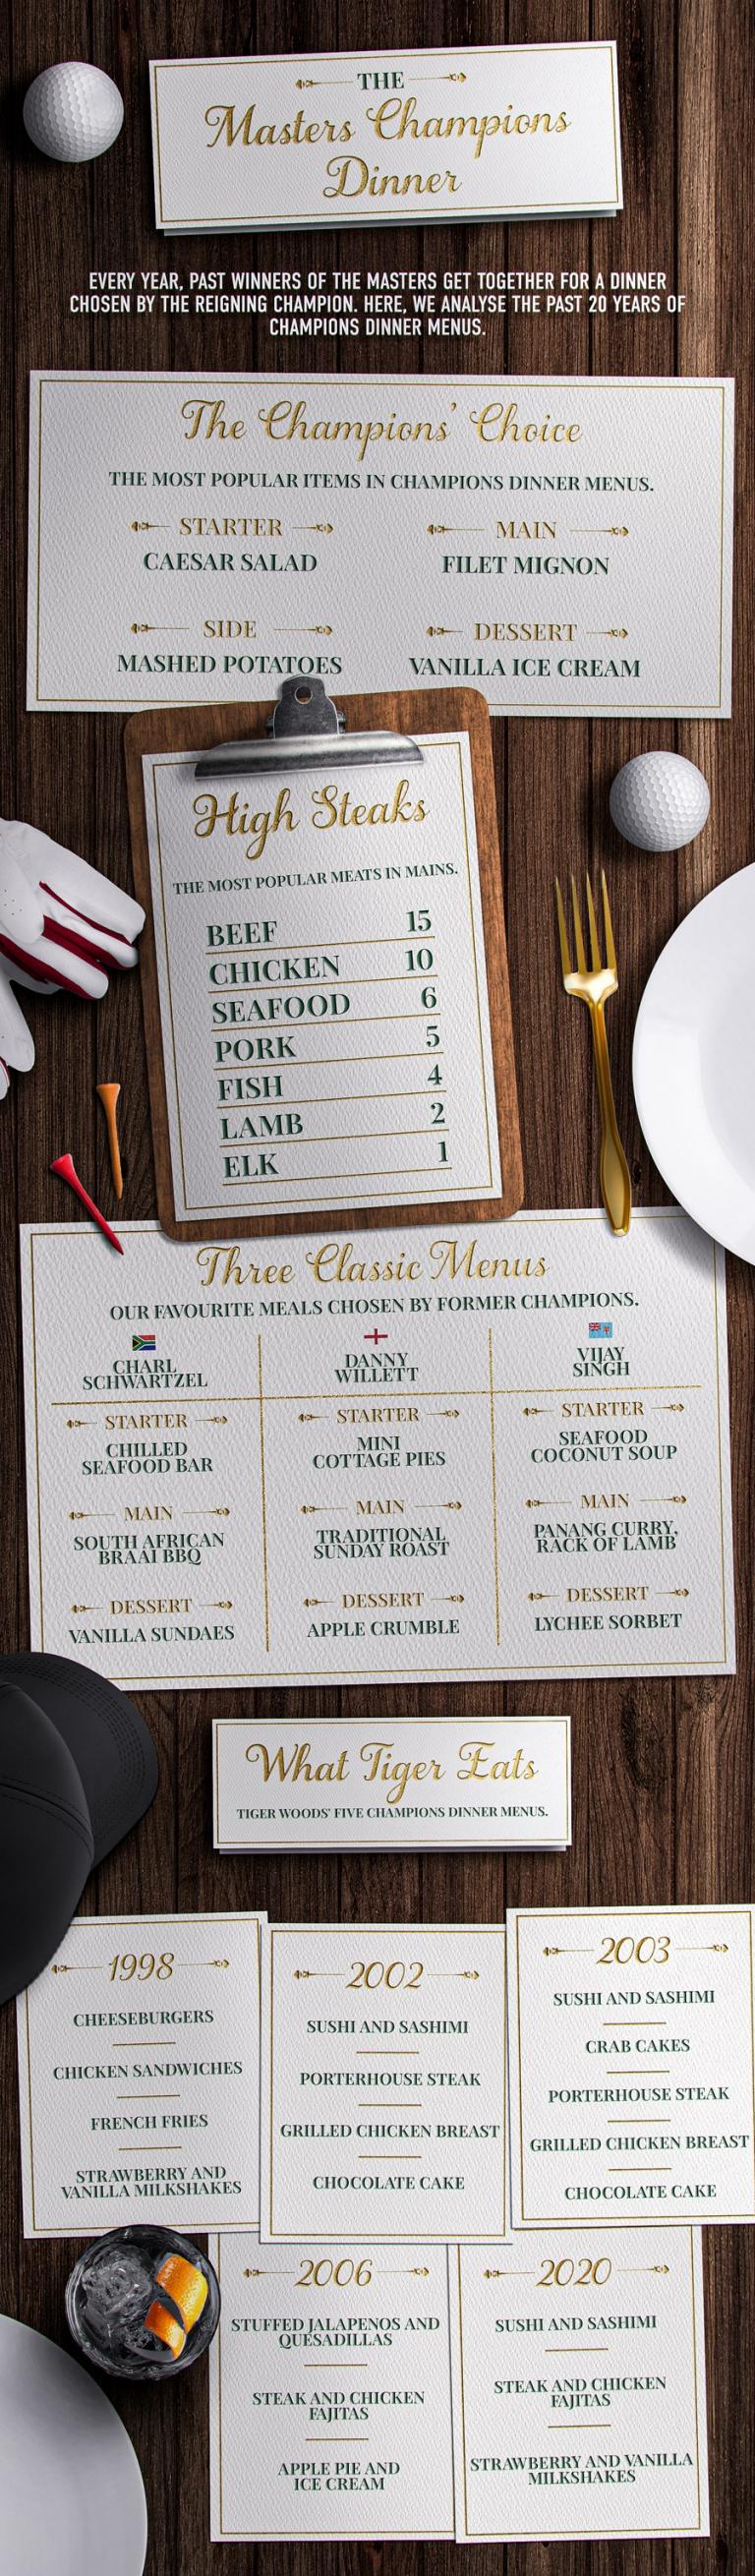 Betway takes a closer look at the best and worst Masters Champions Dinners